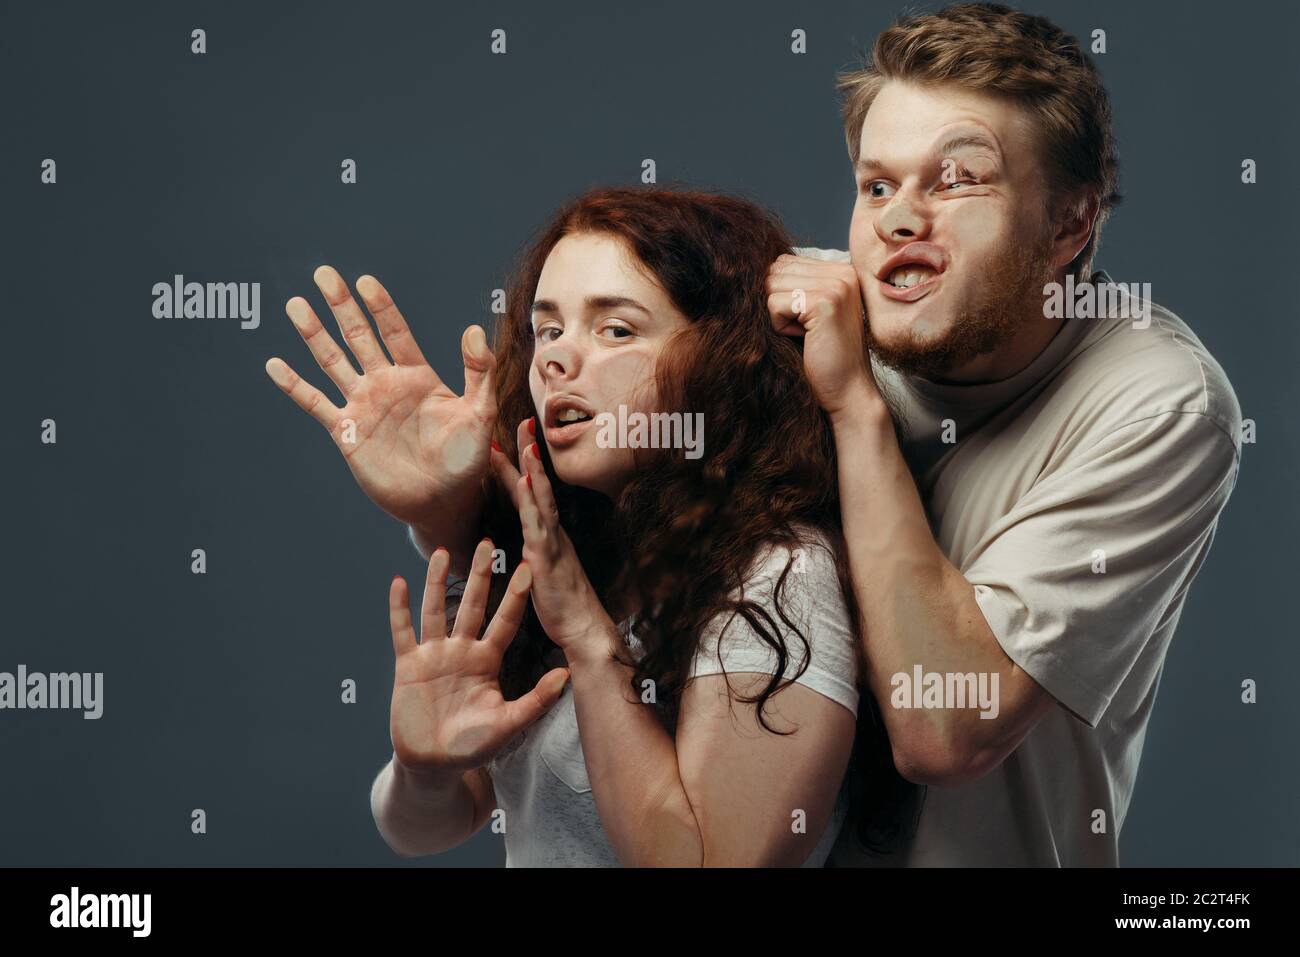 Young couple faces crushed on transparent glass, funny emotion. Man and woman with pressed grimaces standing at the showcase, humor, uncomfortable loo Stock Photo